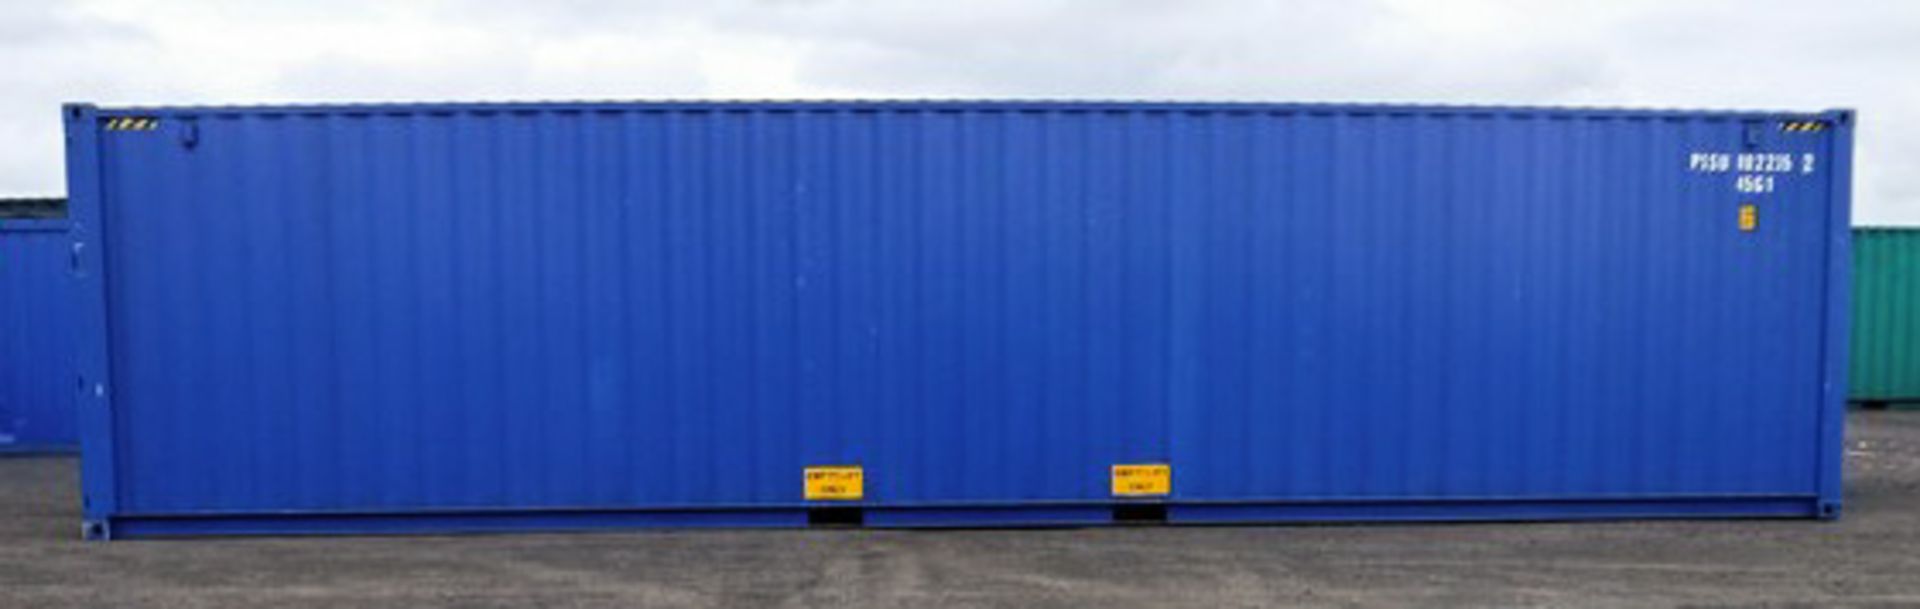 NEW ONE TRIP HIGH CUBE 40' X 8' X 9'6" SHIPPING CONTAINER, C/W FORK POCKETS, LIFTING POINTS & LOCK B - Image 3 of 9